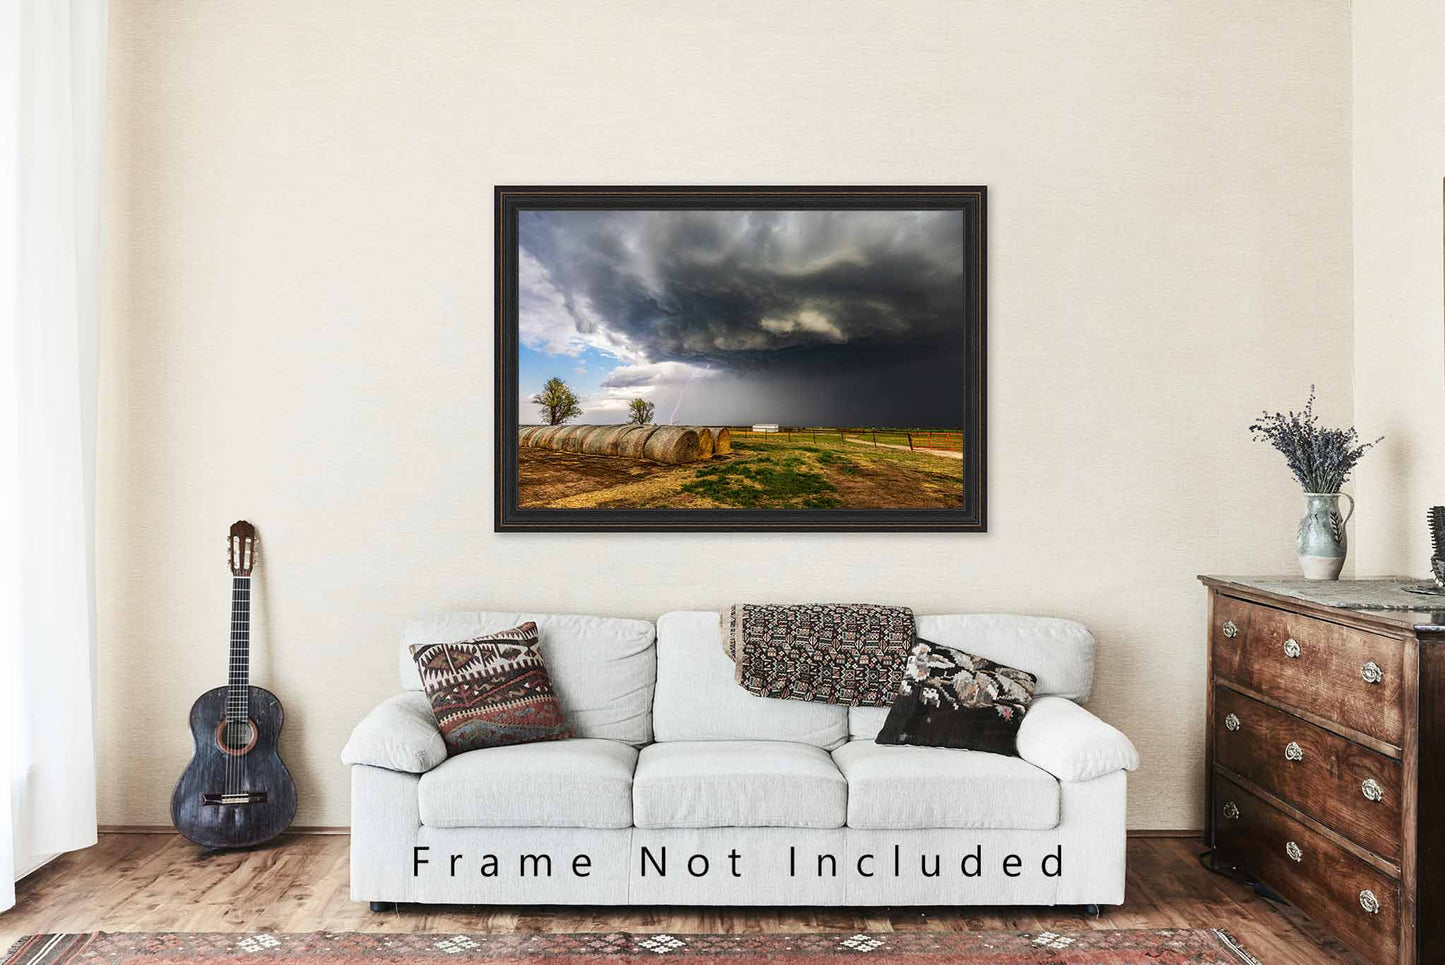 Storm Photography Print - Picture of Thunderstorm with Lighting Strike Over Round Hay Bales in Oklahoma Farm Wall Art Weather Decor